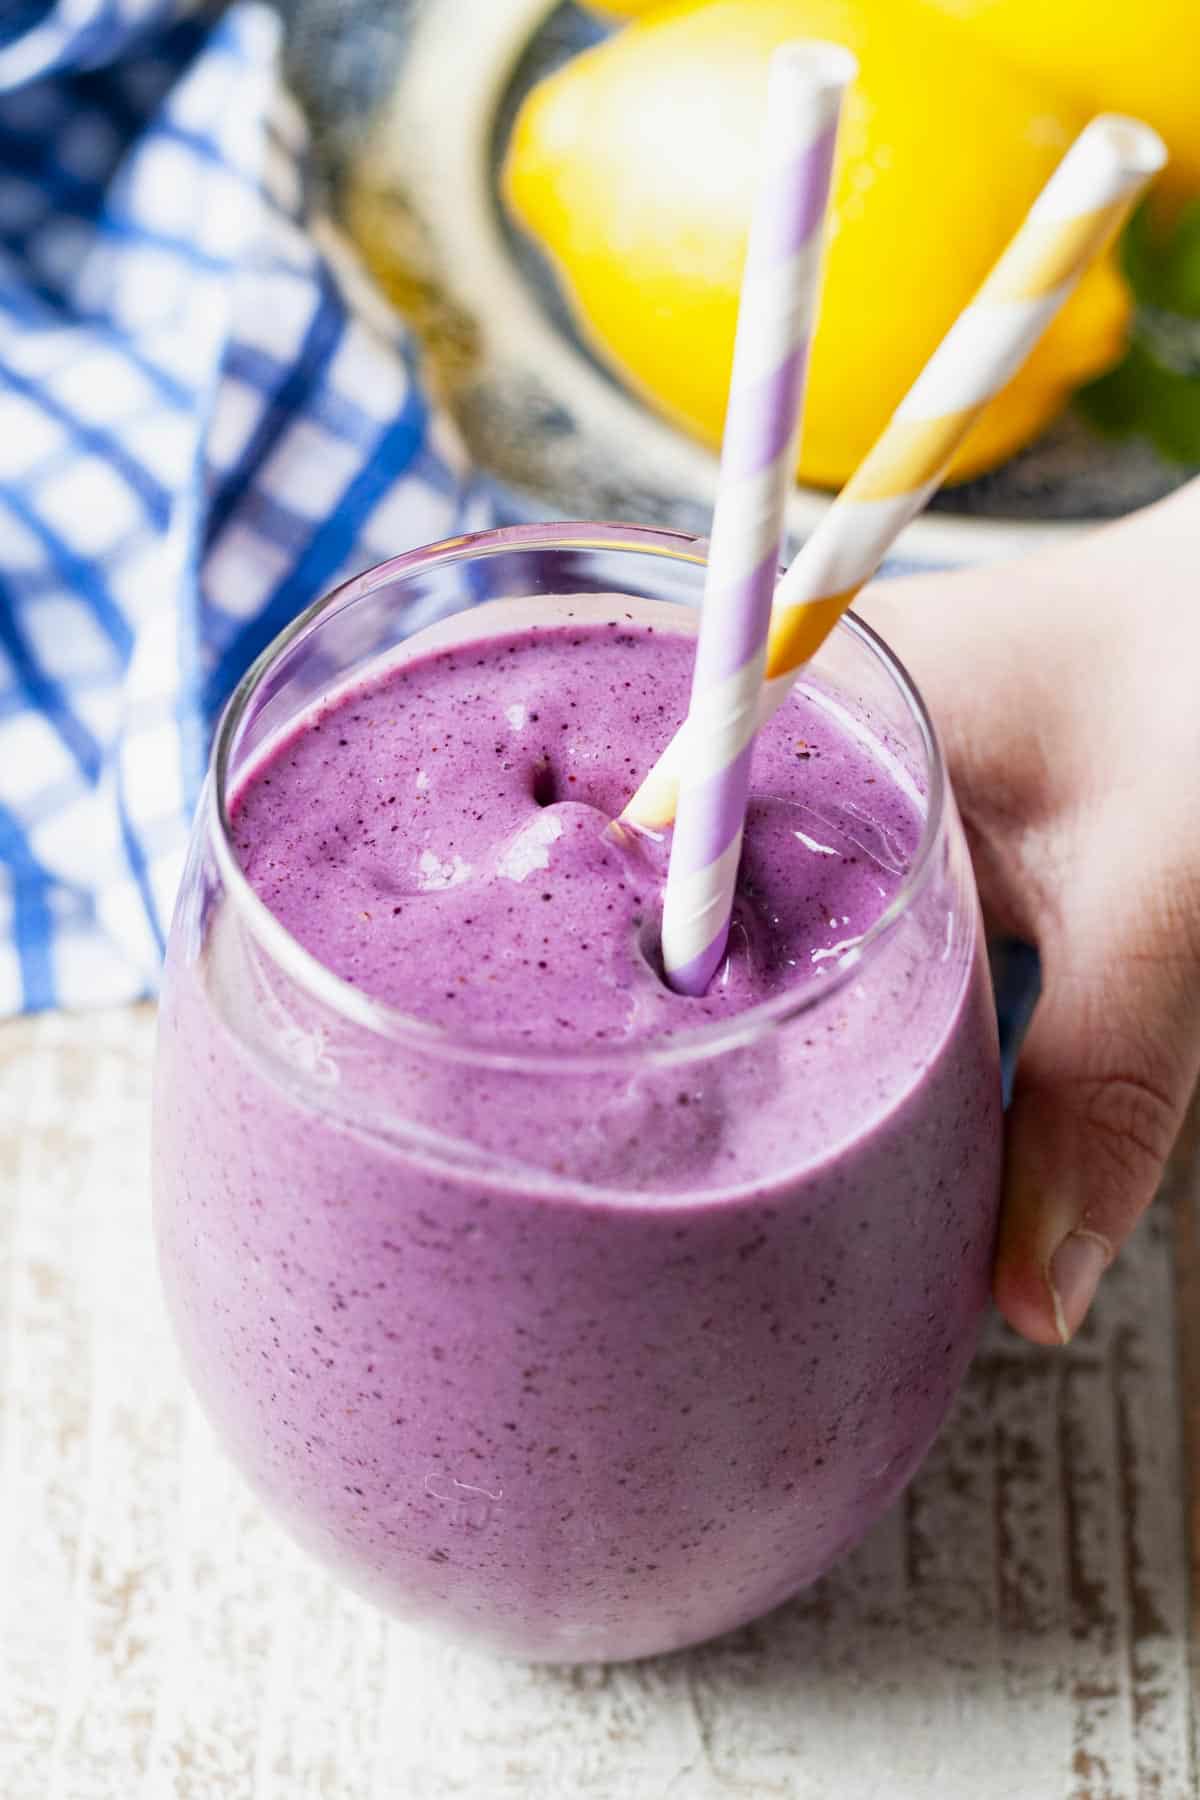 Child's hand holding a glass of blueberry banana smoothie.